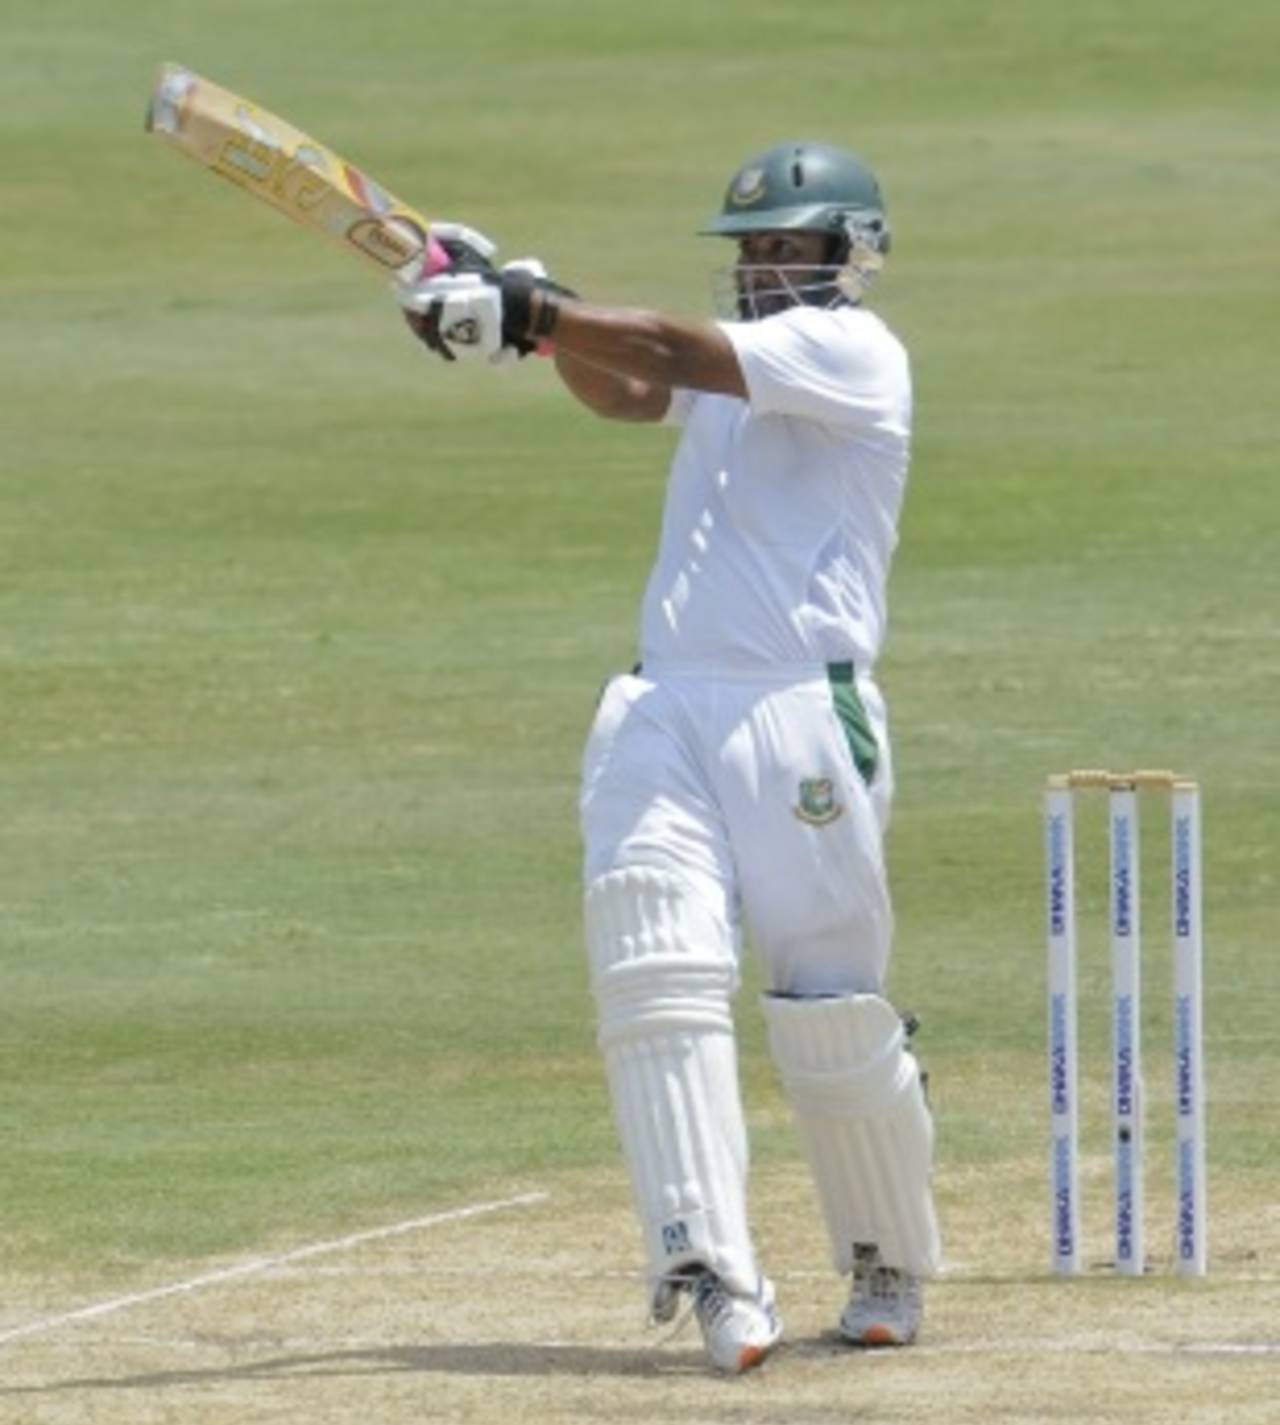 Tamim Iqbal pulls during his 181-ball 64, West Indies v Bangladesh, 2nd Test, St. Lucia, 4th day, September 16, 2014